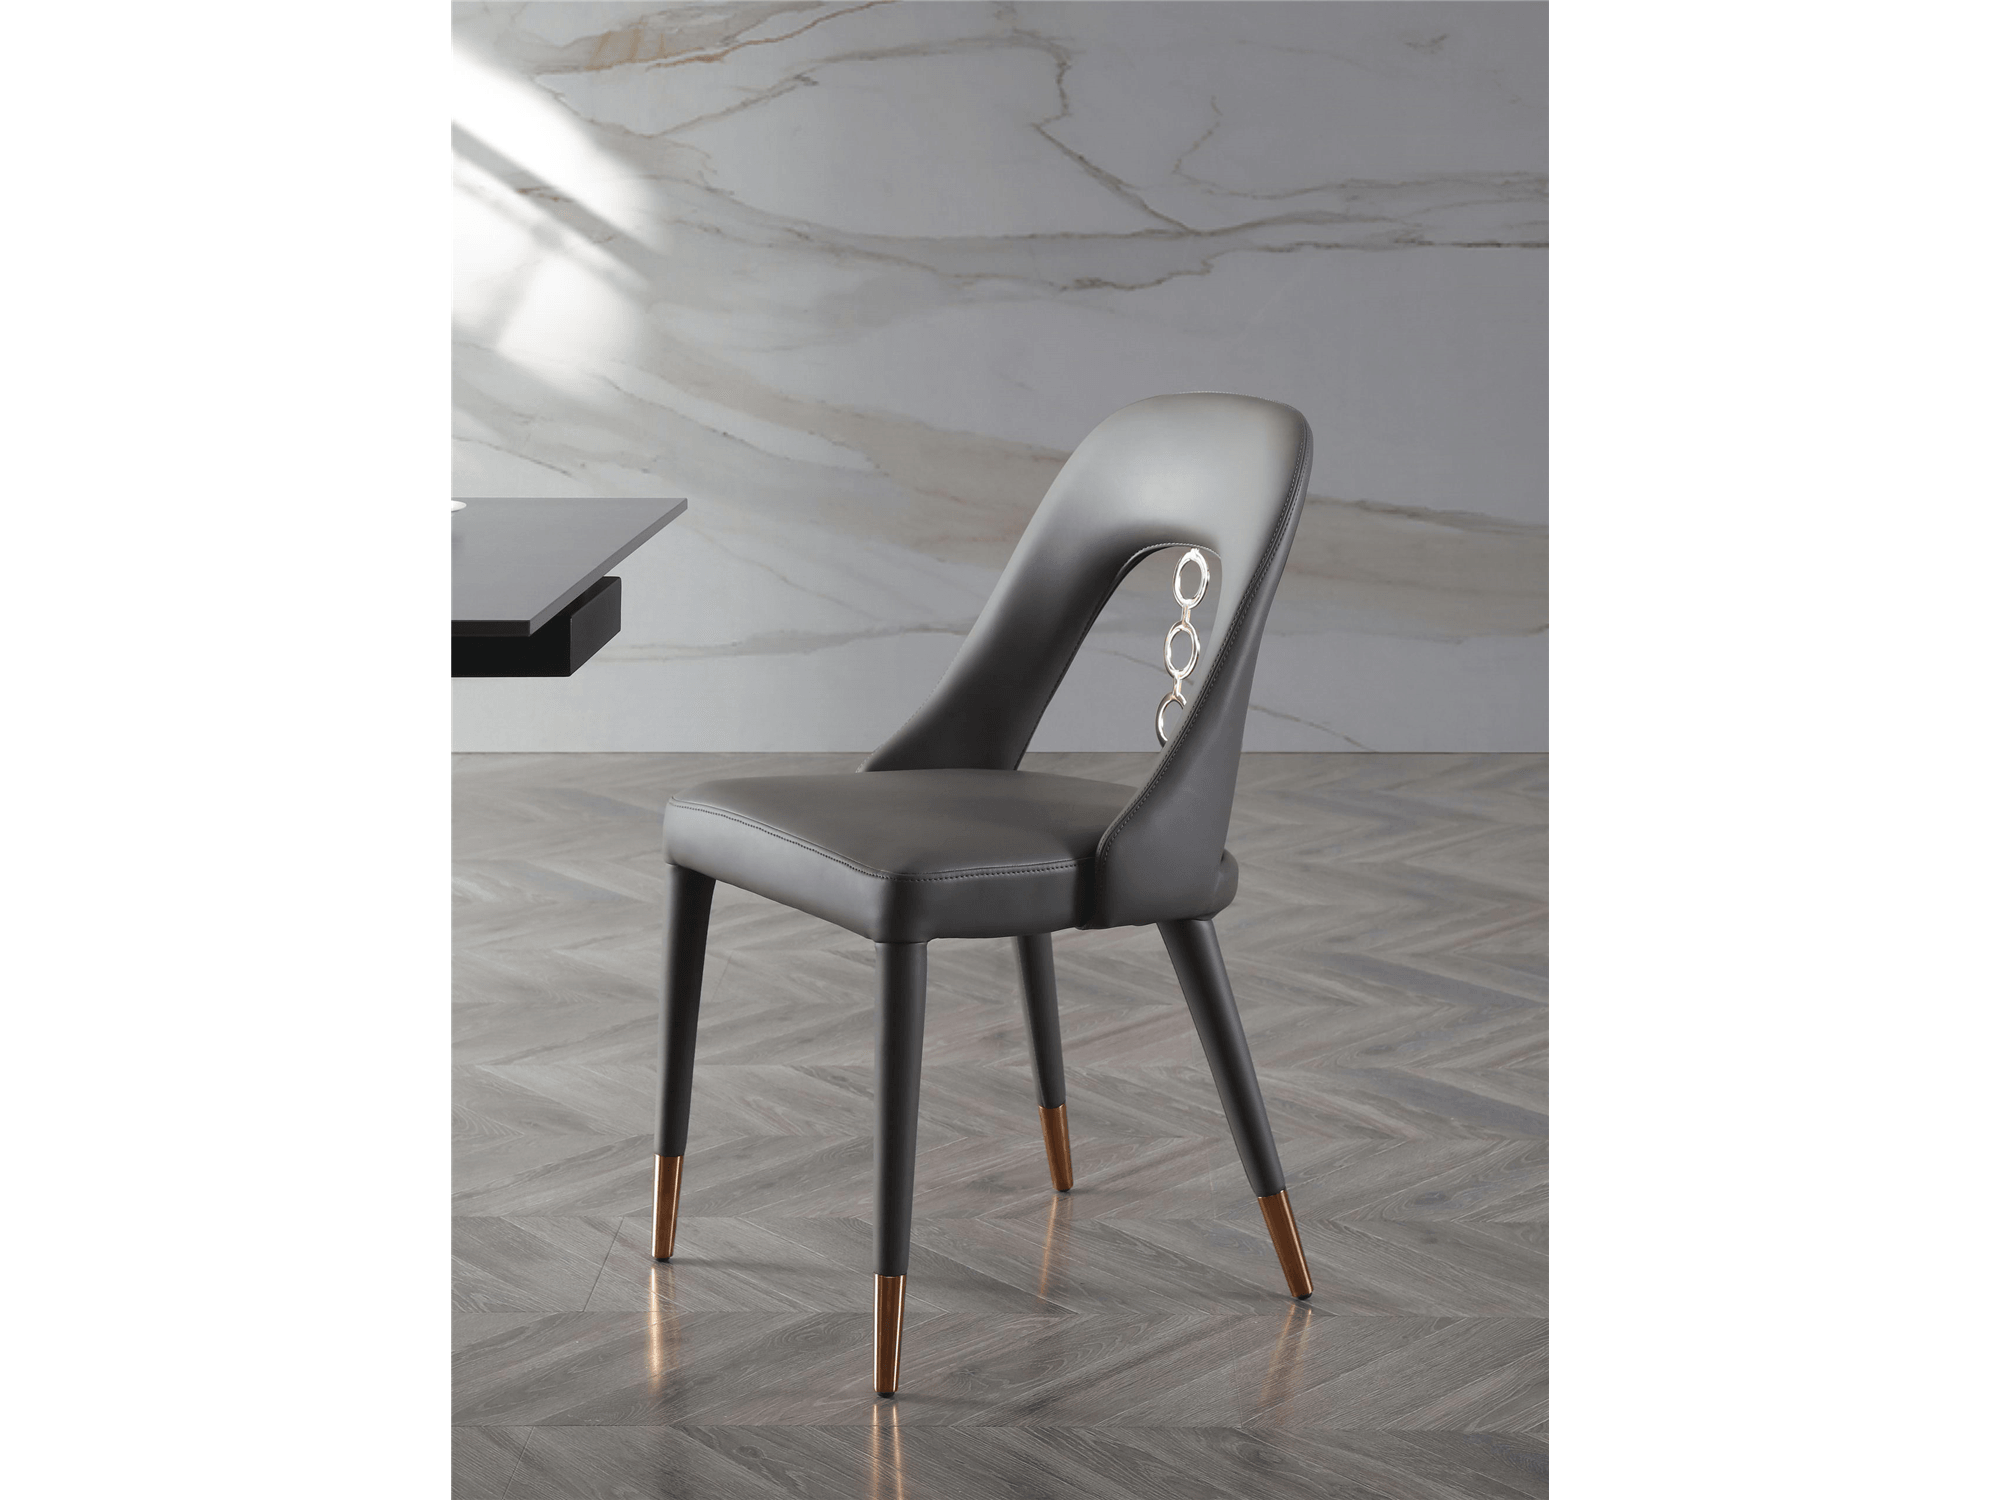 Marva Dining Chair - Euro Living Furniture